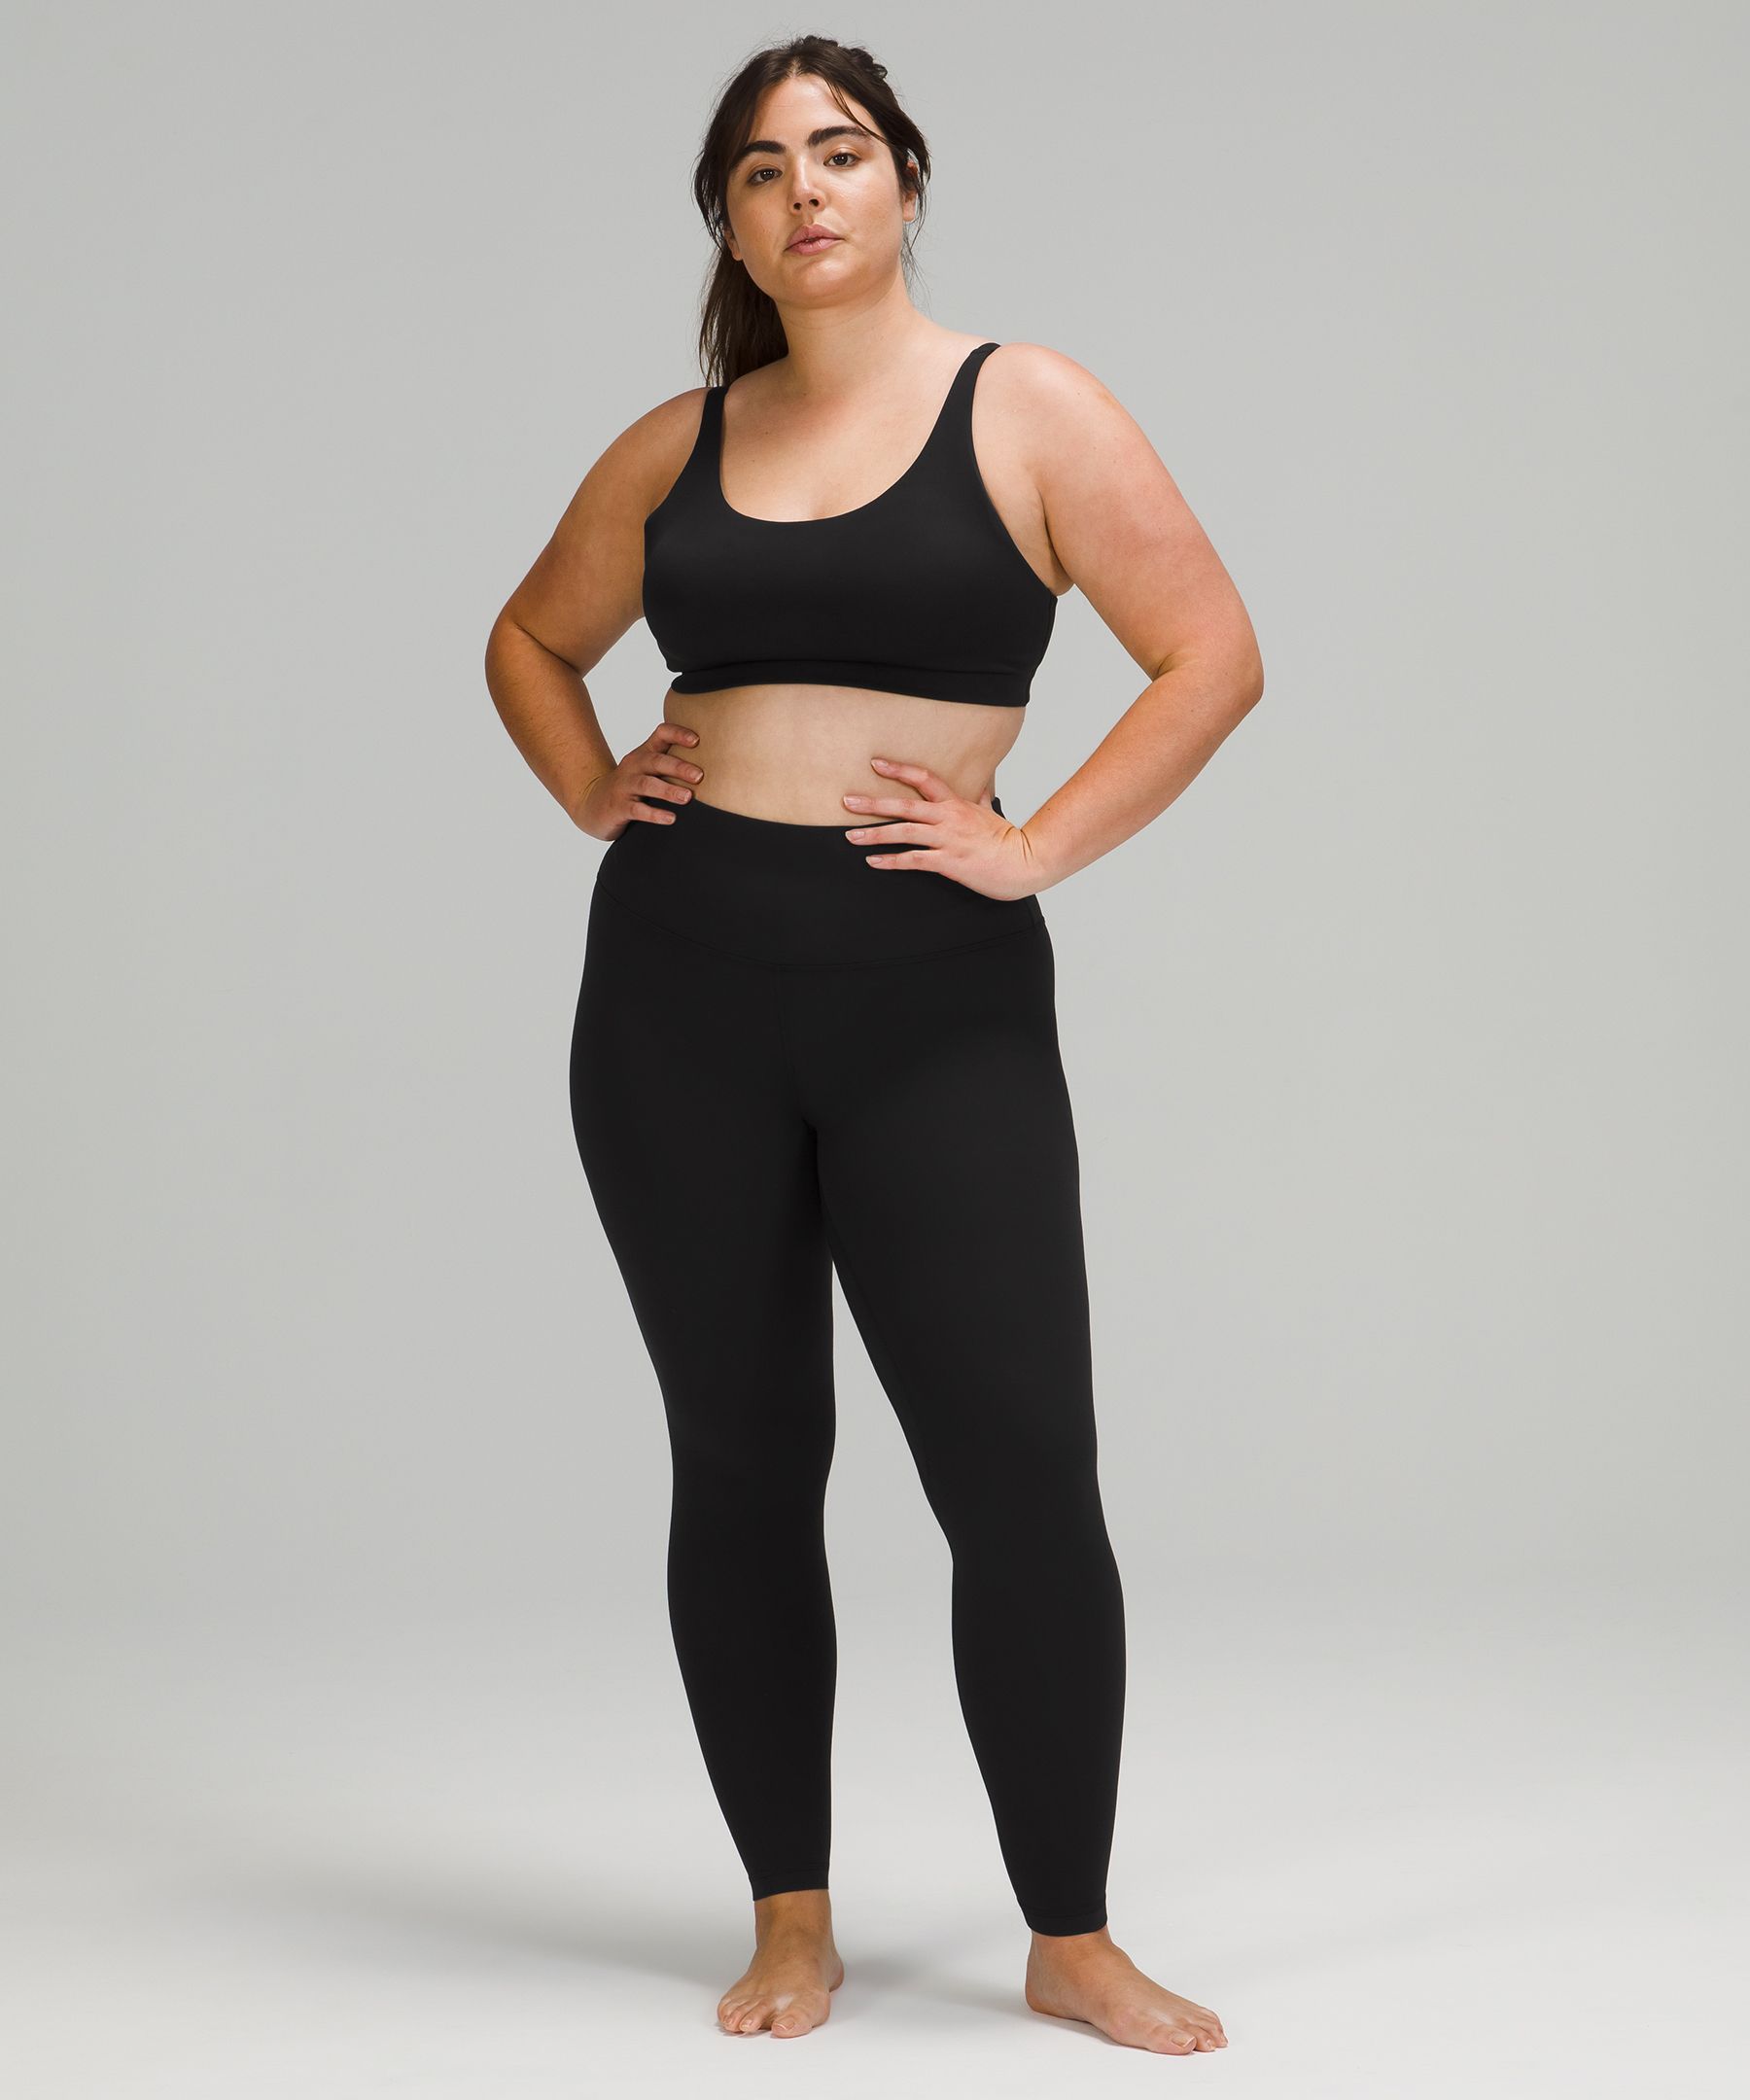 New Style Designer Yoga Tracksuit For Women Fitness Align Pant Seamless Gym  Leggings And Workout Set With Active Shirt For Active Ladies From  Bianvincentyg, $31.12